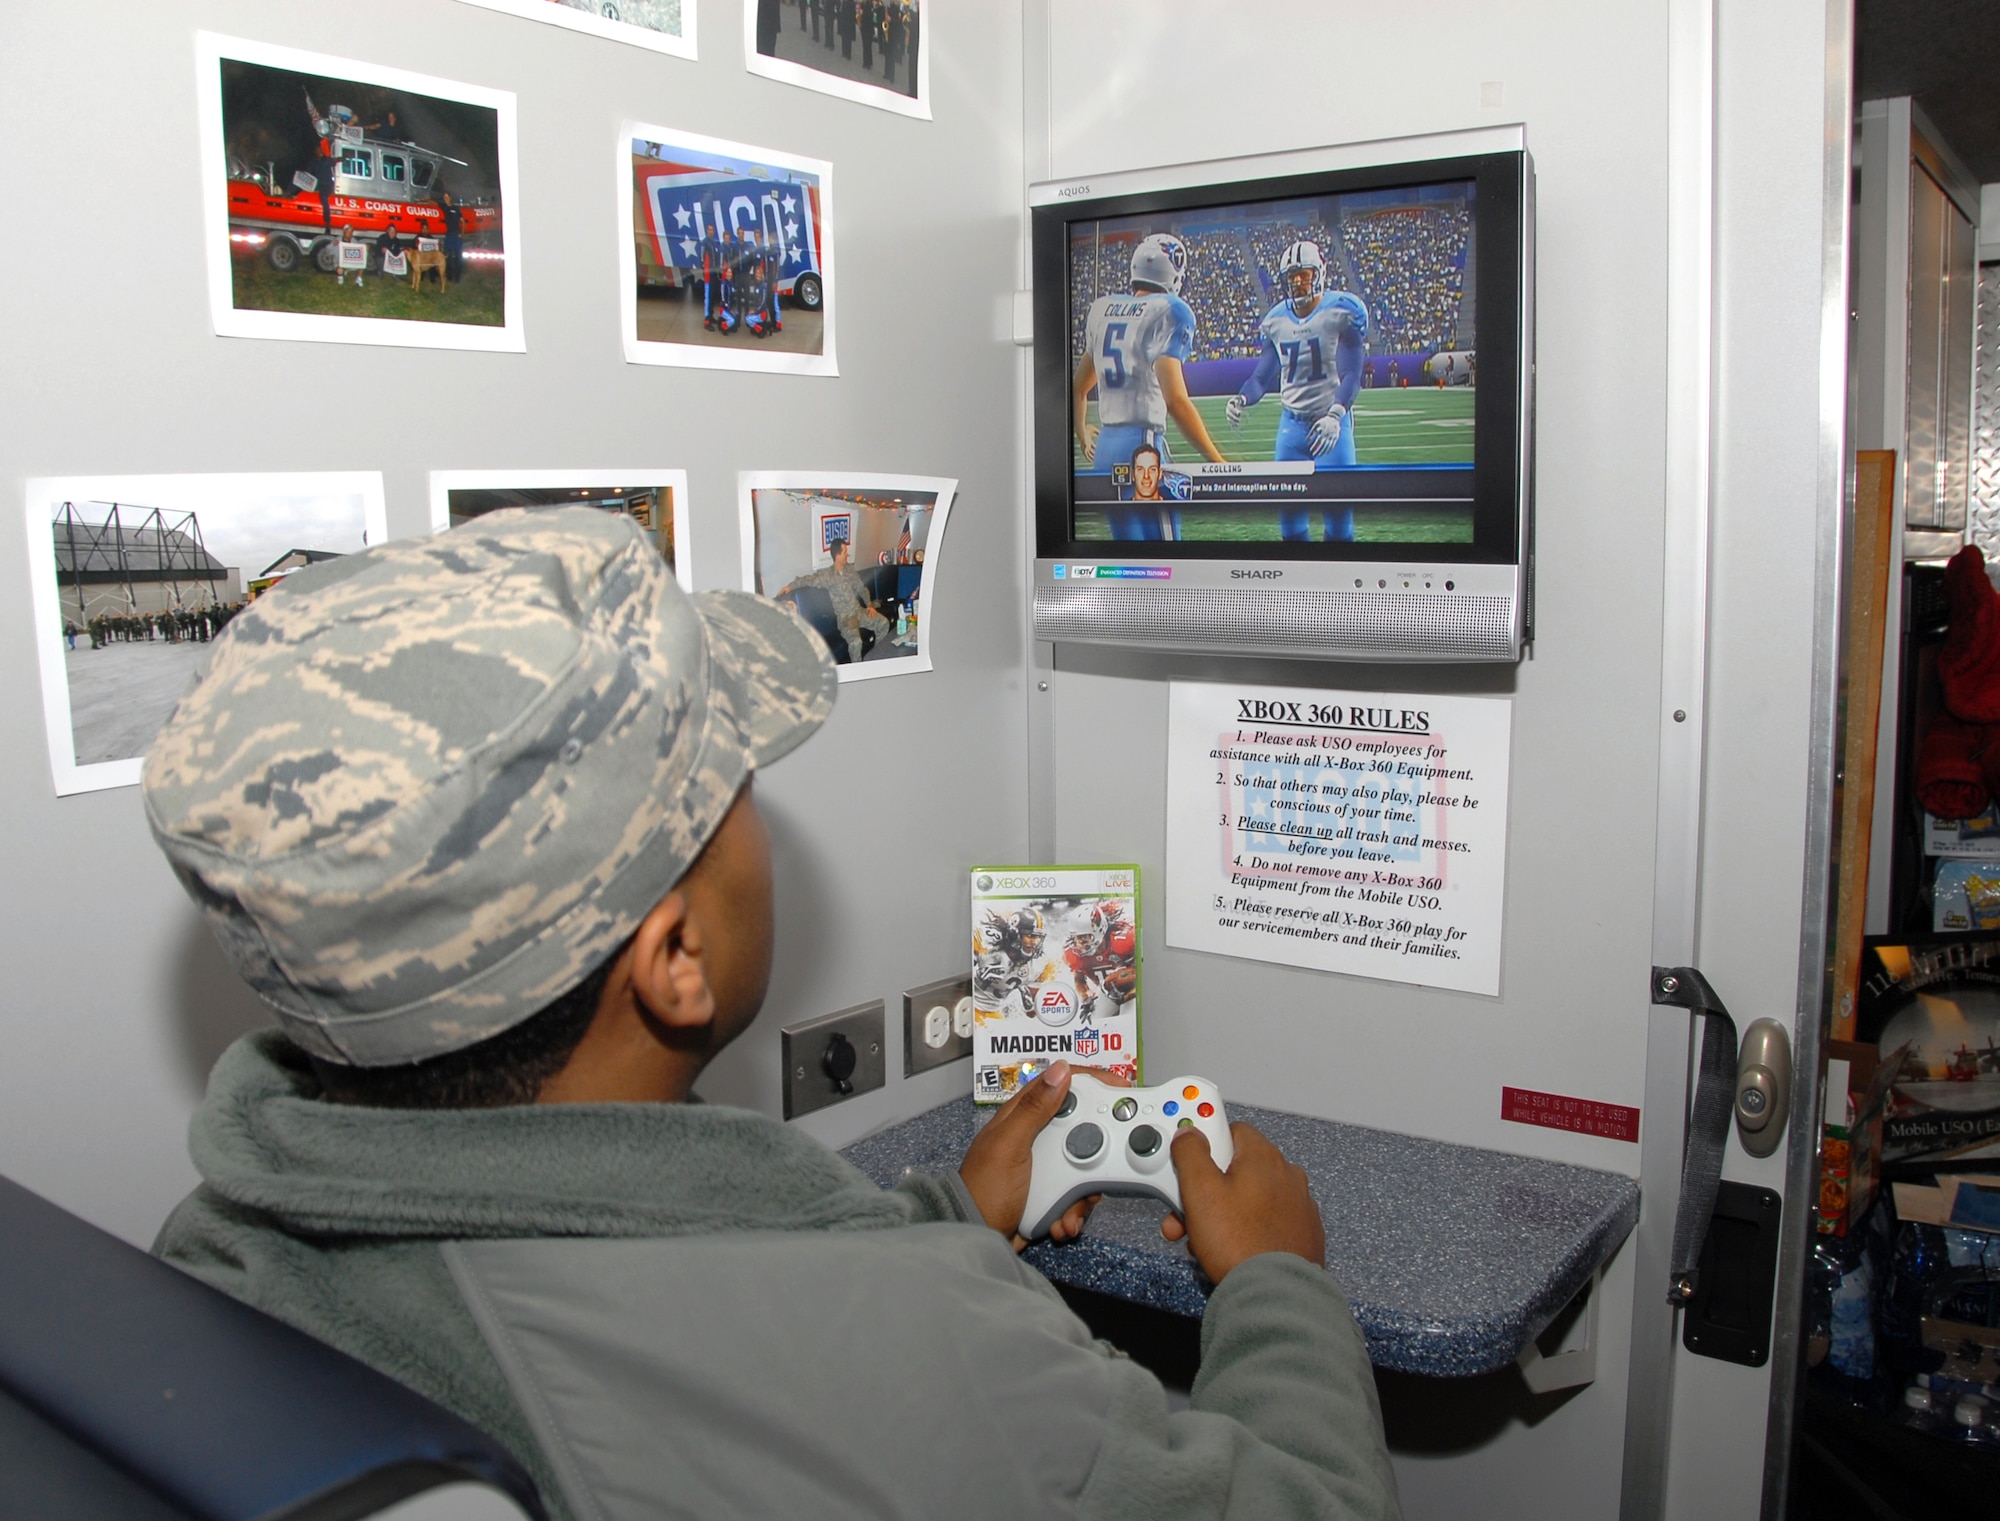 Staff Sgt. Stephen West, 118th AW recruiter, stopped by the Mobile USO and played on one of the four XBox stations inside.